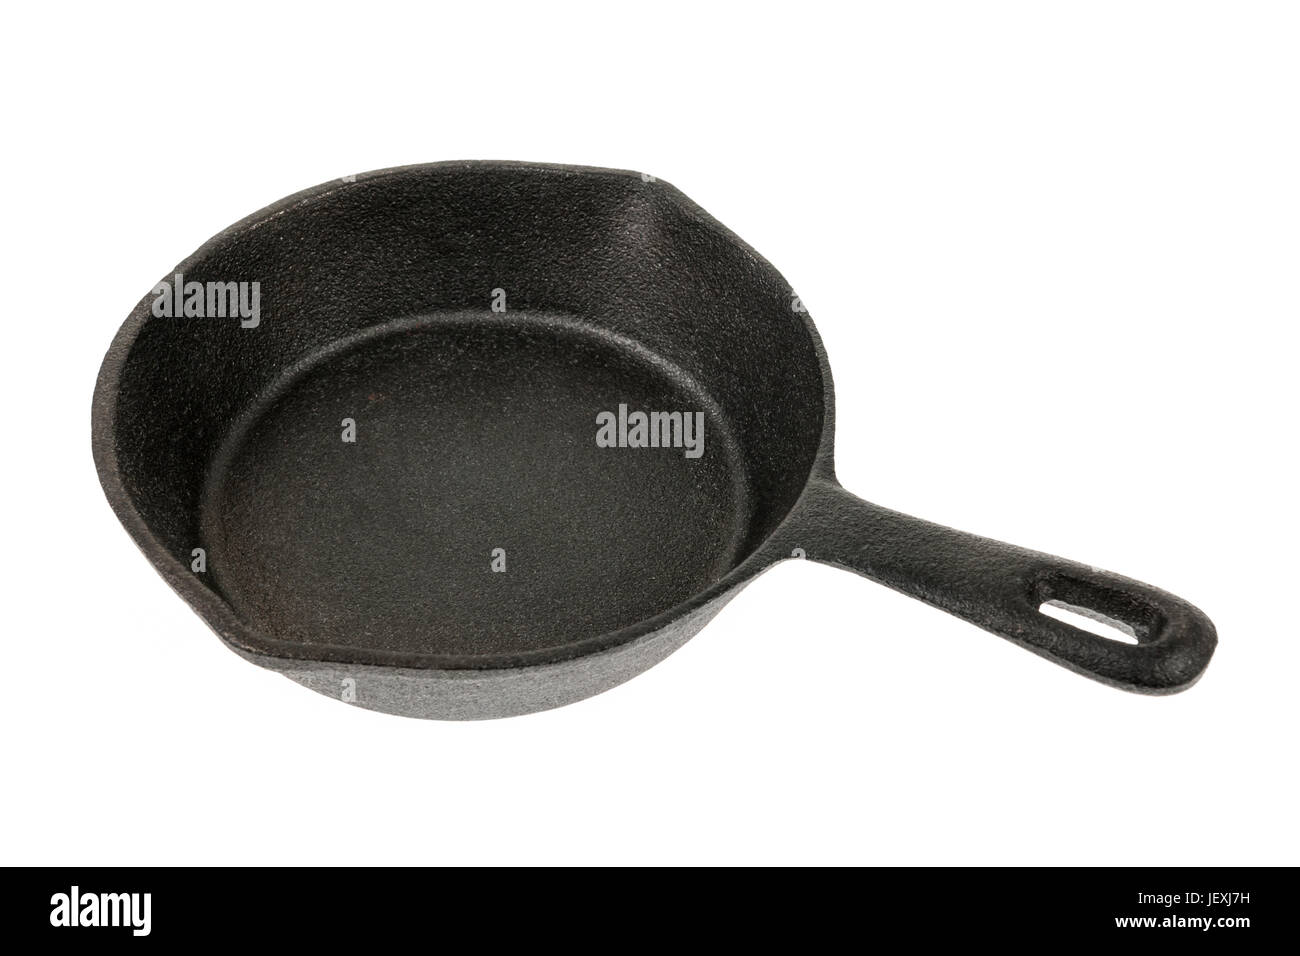 Cast iron black frying pan isolated on white background, side view Stock Photo